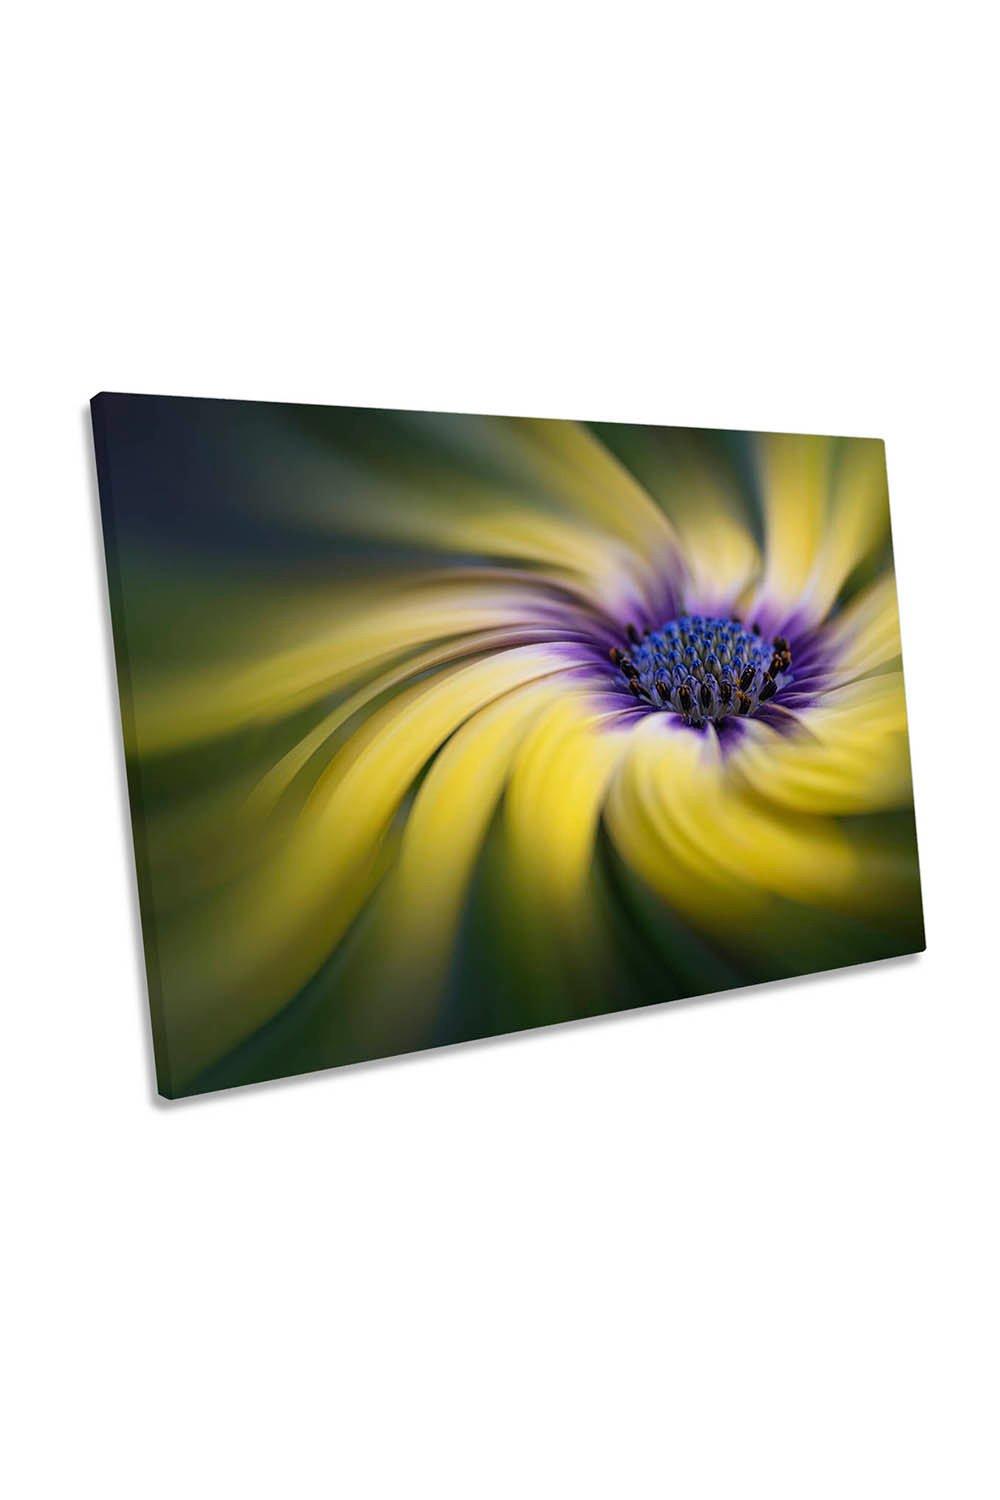 Dancing Yellow Daisy Flower Floral Canvas Wall Art Picture Print